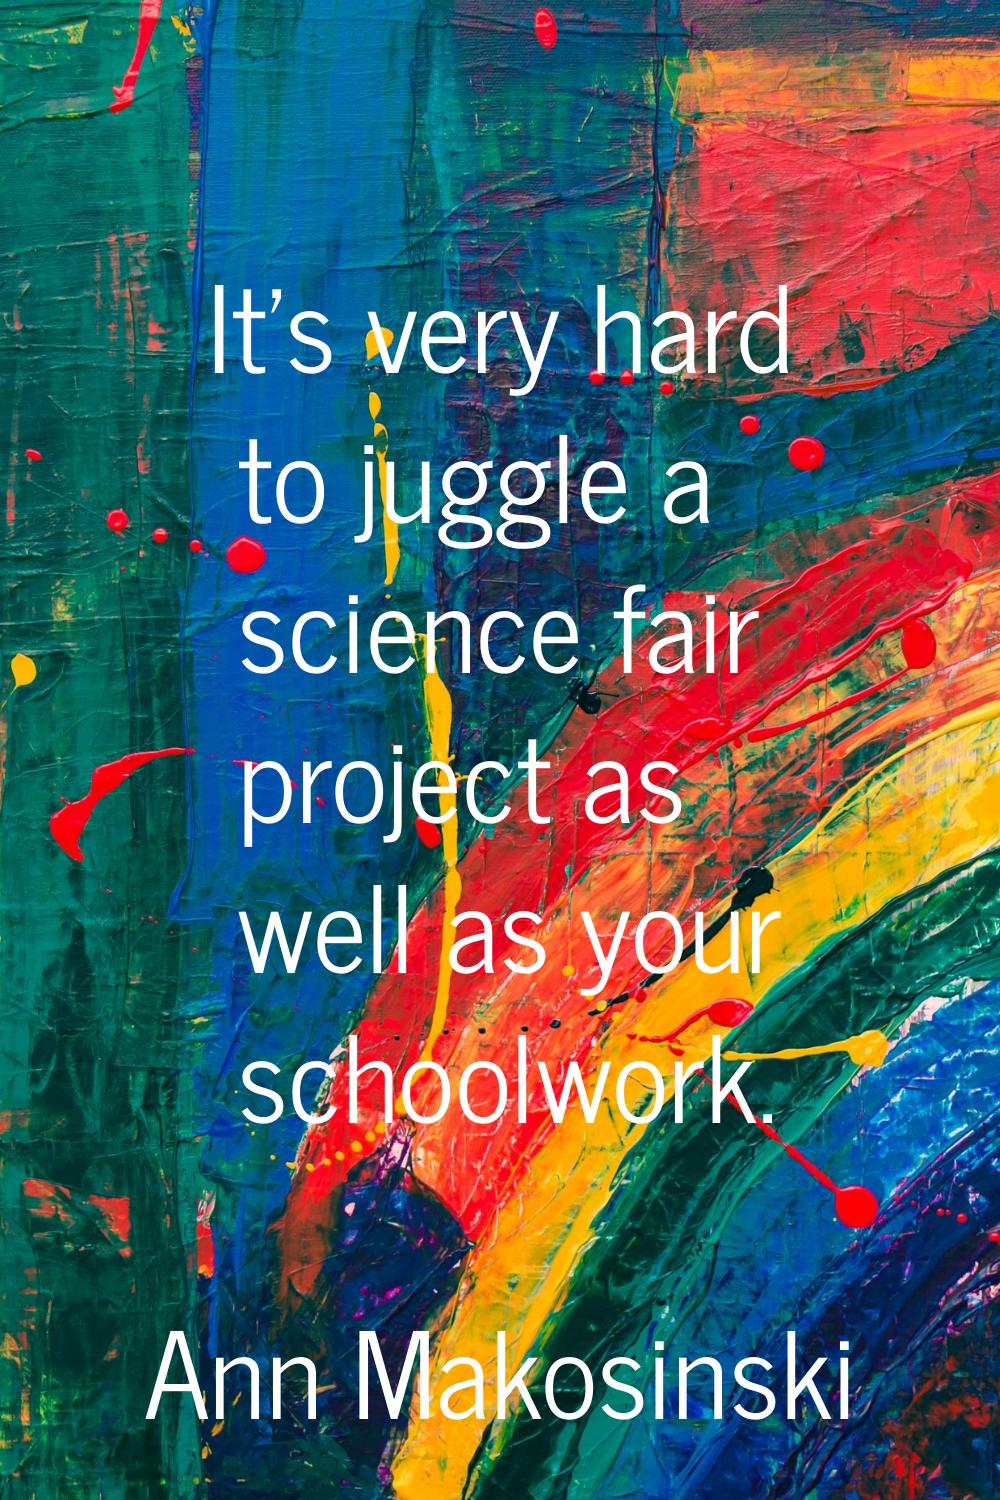 It's very hard to juggle a science fair project as well as your schoolwork.